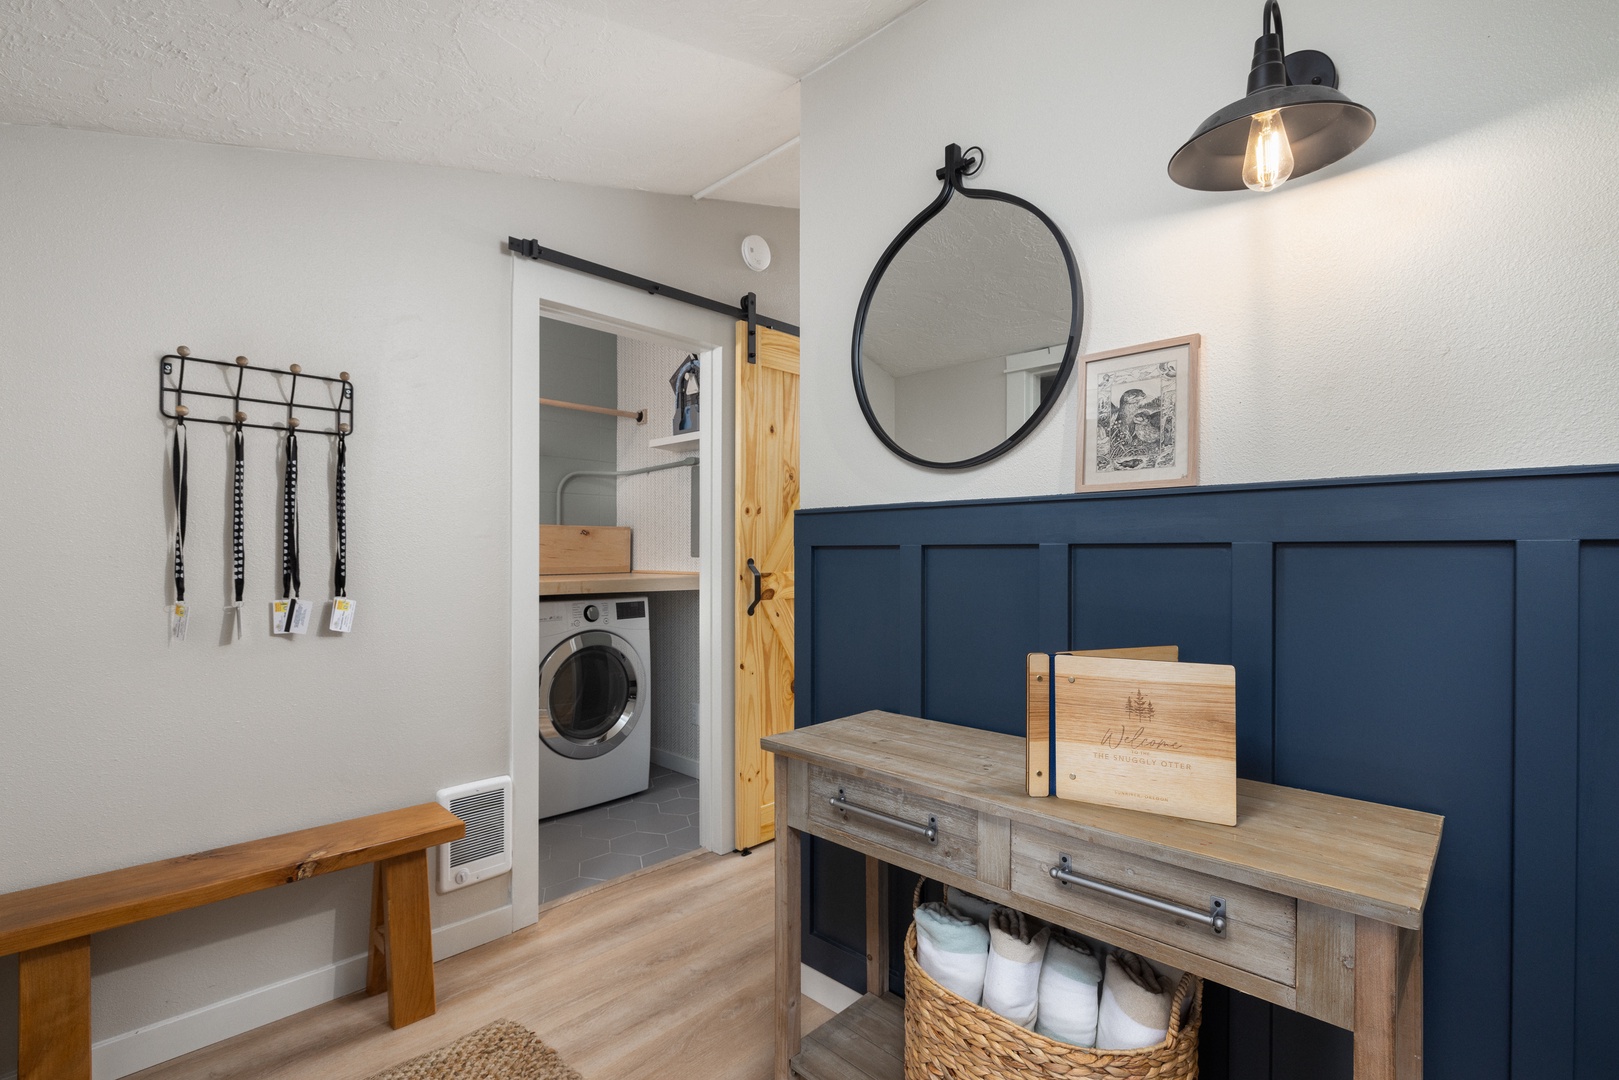 Private laundry is available for your stay, tucked away near the entrance